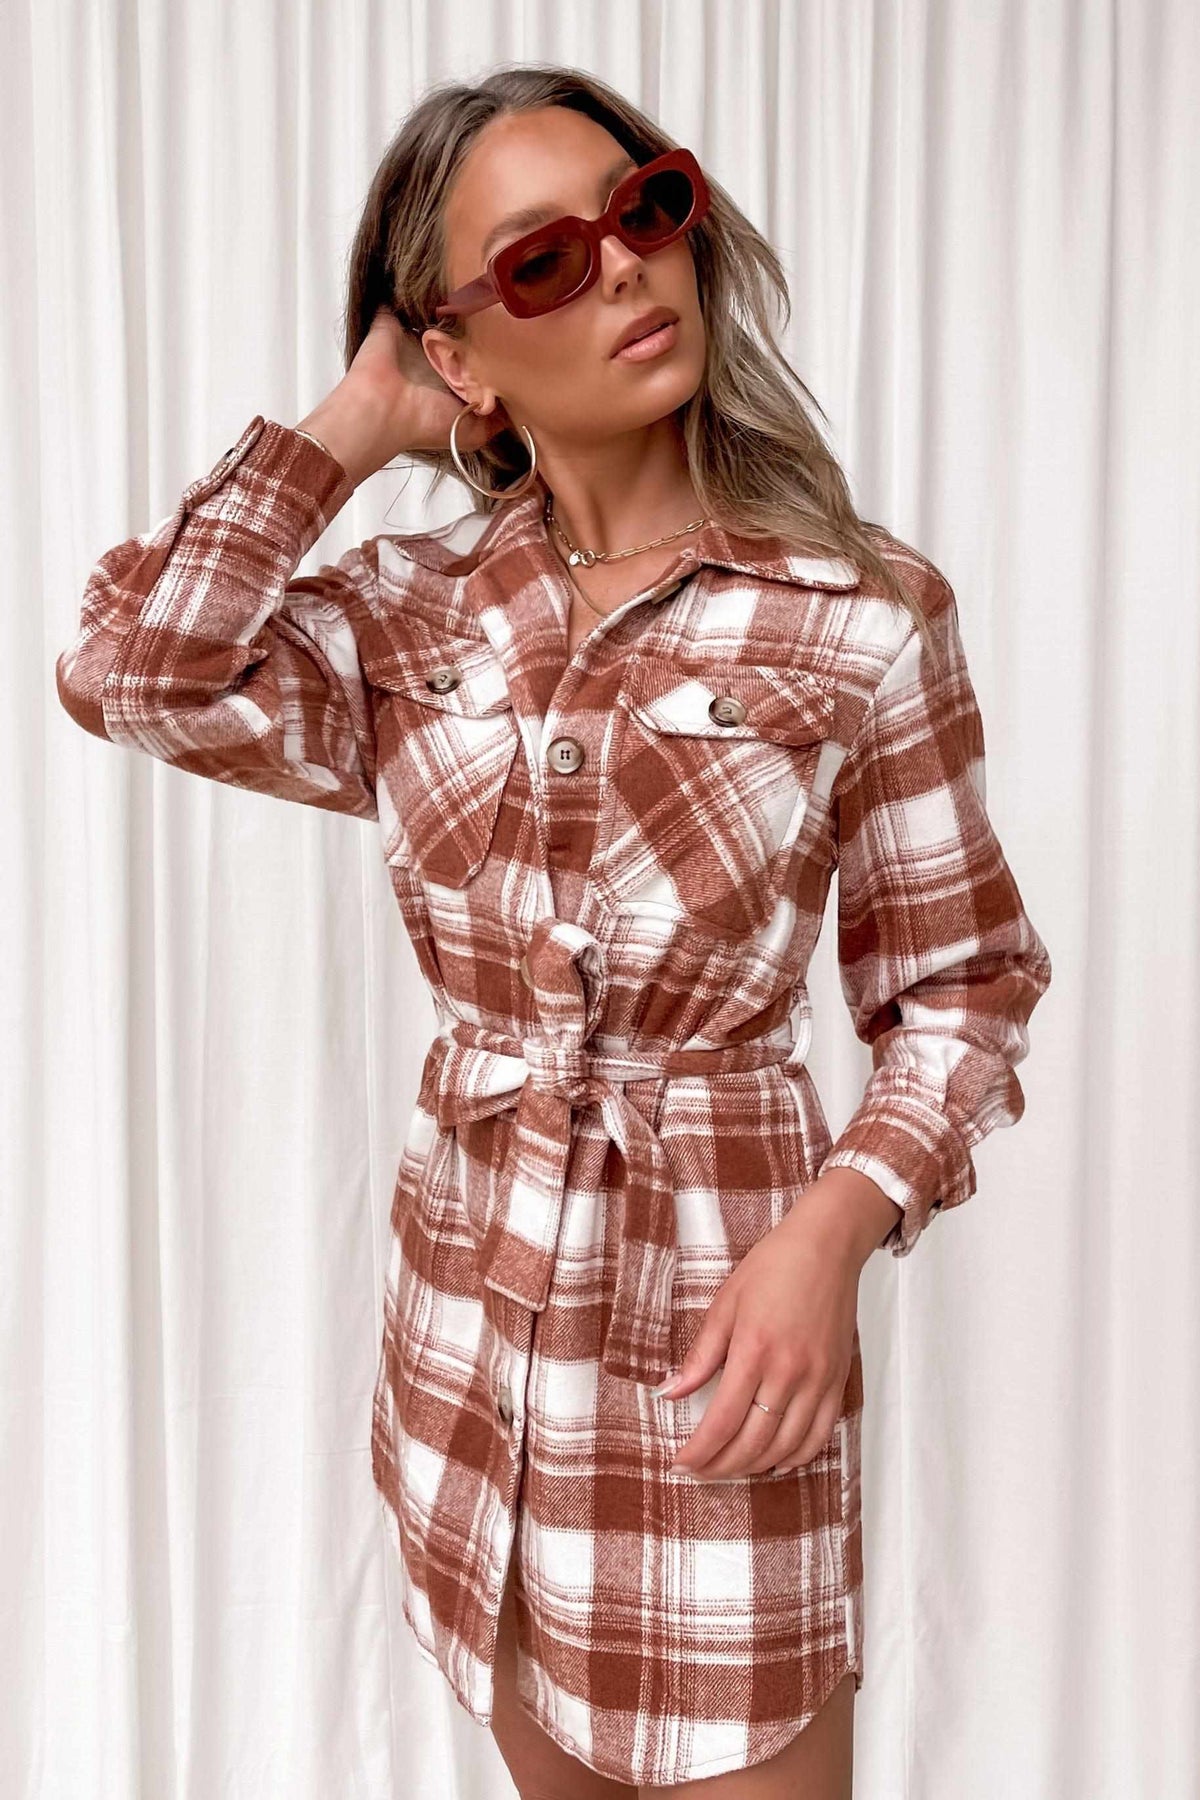 Sorbet Jacket, BUTTON UP, CHECK, DRESS, JACKETS, LONG SLEEVE, POLYESTER, RED, Sale, WAIST TIE, Sorbet Jacket only $76.00 @ MISHKAH ONLINE FASHION BOUTIQUE, Shop The Latest Women&#39;s Dresses - Our New Sorbet Jacket is only $76.00, @ MISHKAH ONLINE FASHION BOUTIQUE-MISHKAH